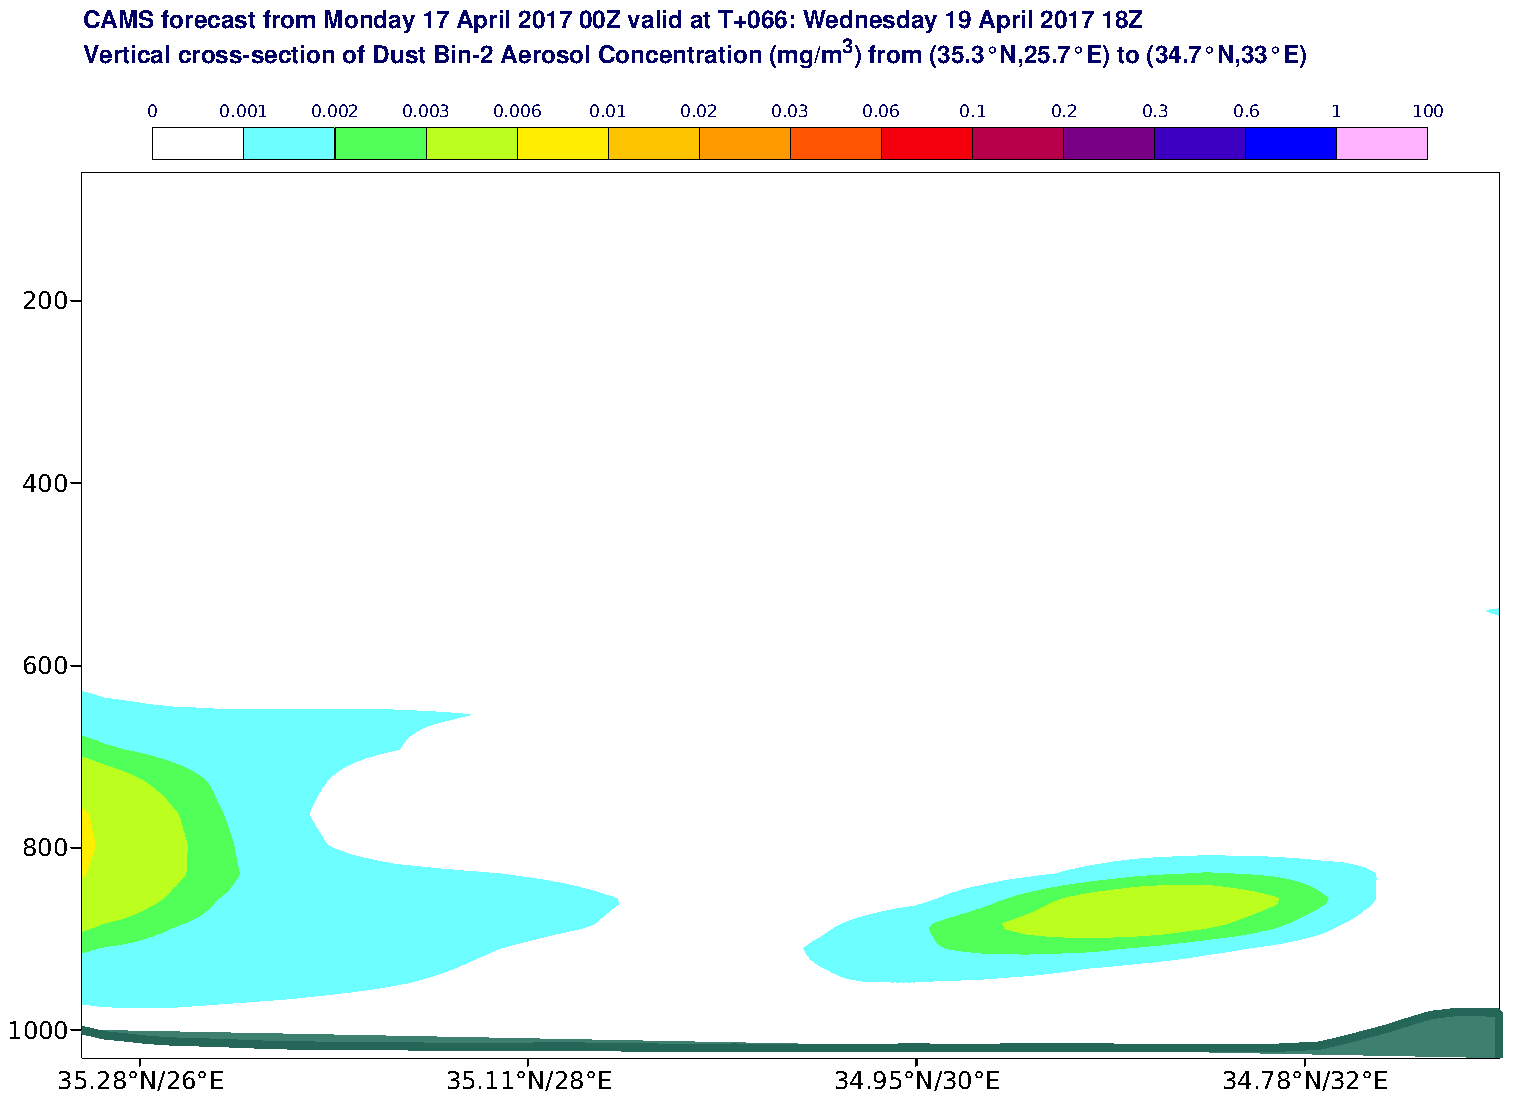 Vertical cross-section of Dust Bin-2 Aerosol Concentration (mg/m3) valid at T66 - 2017-04-19 18:00